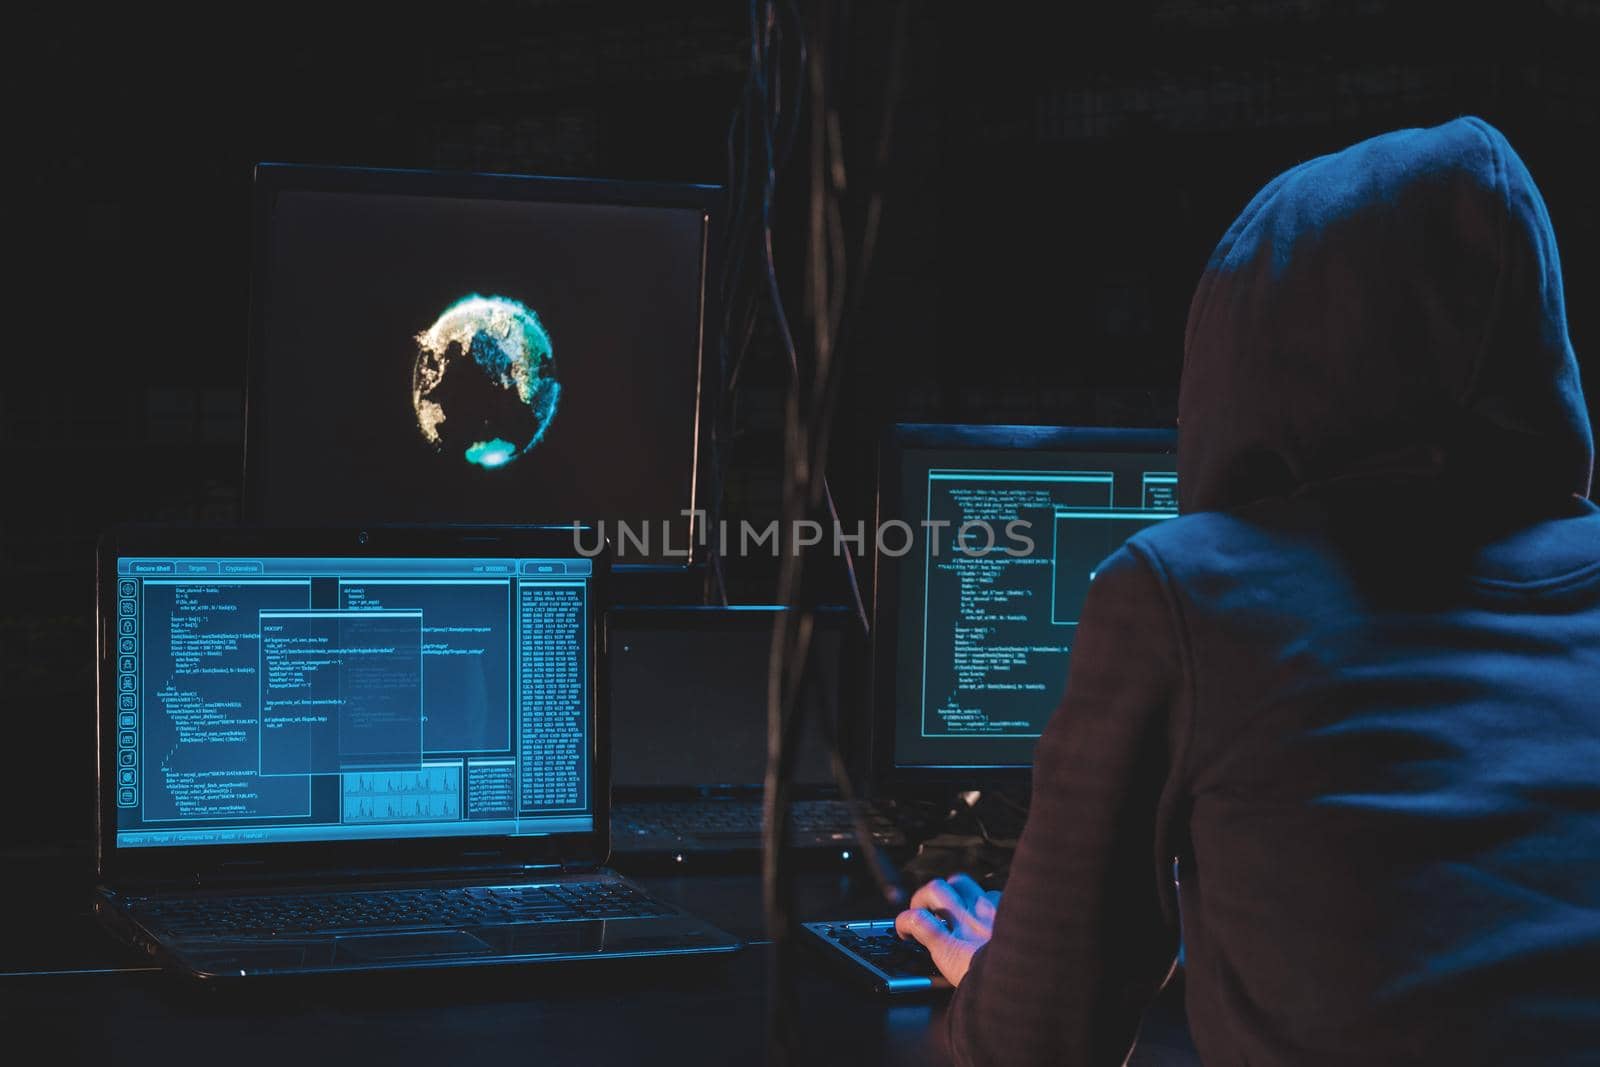 Back hooded hacker using malicious software hack corporate data center. malefactor hidden underground in dark place, multiple displays with phishing code and global map attack.